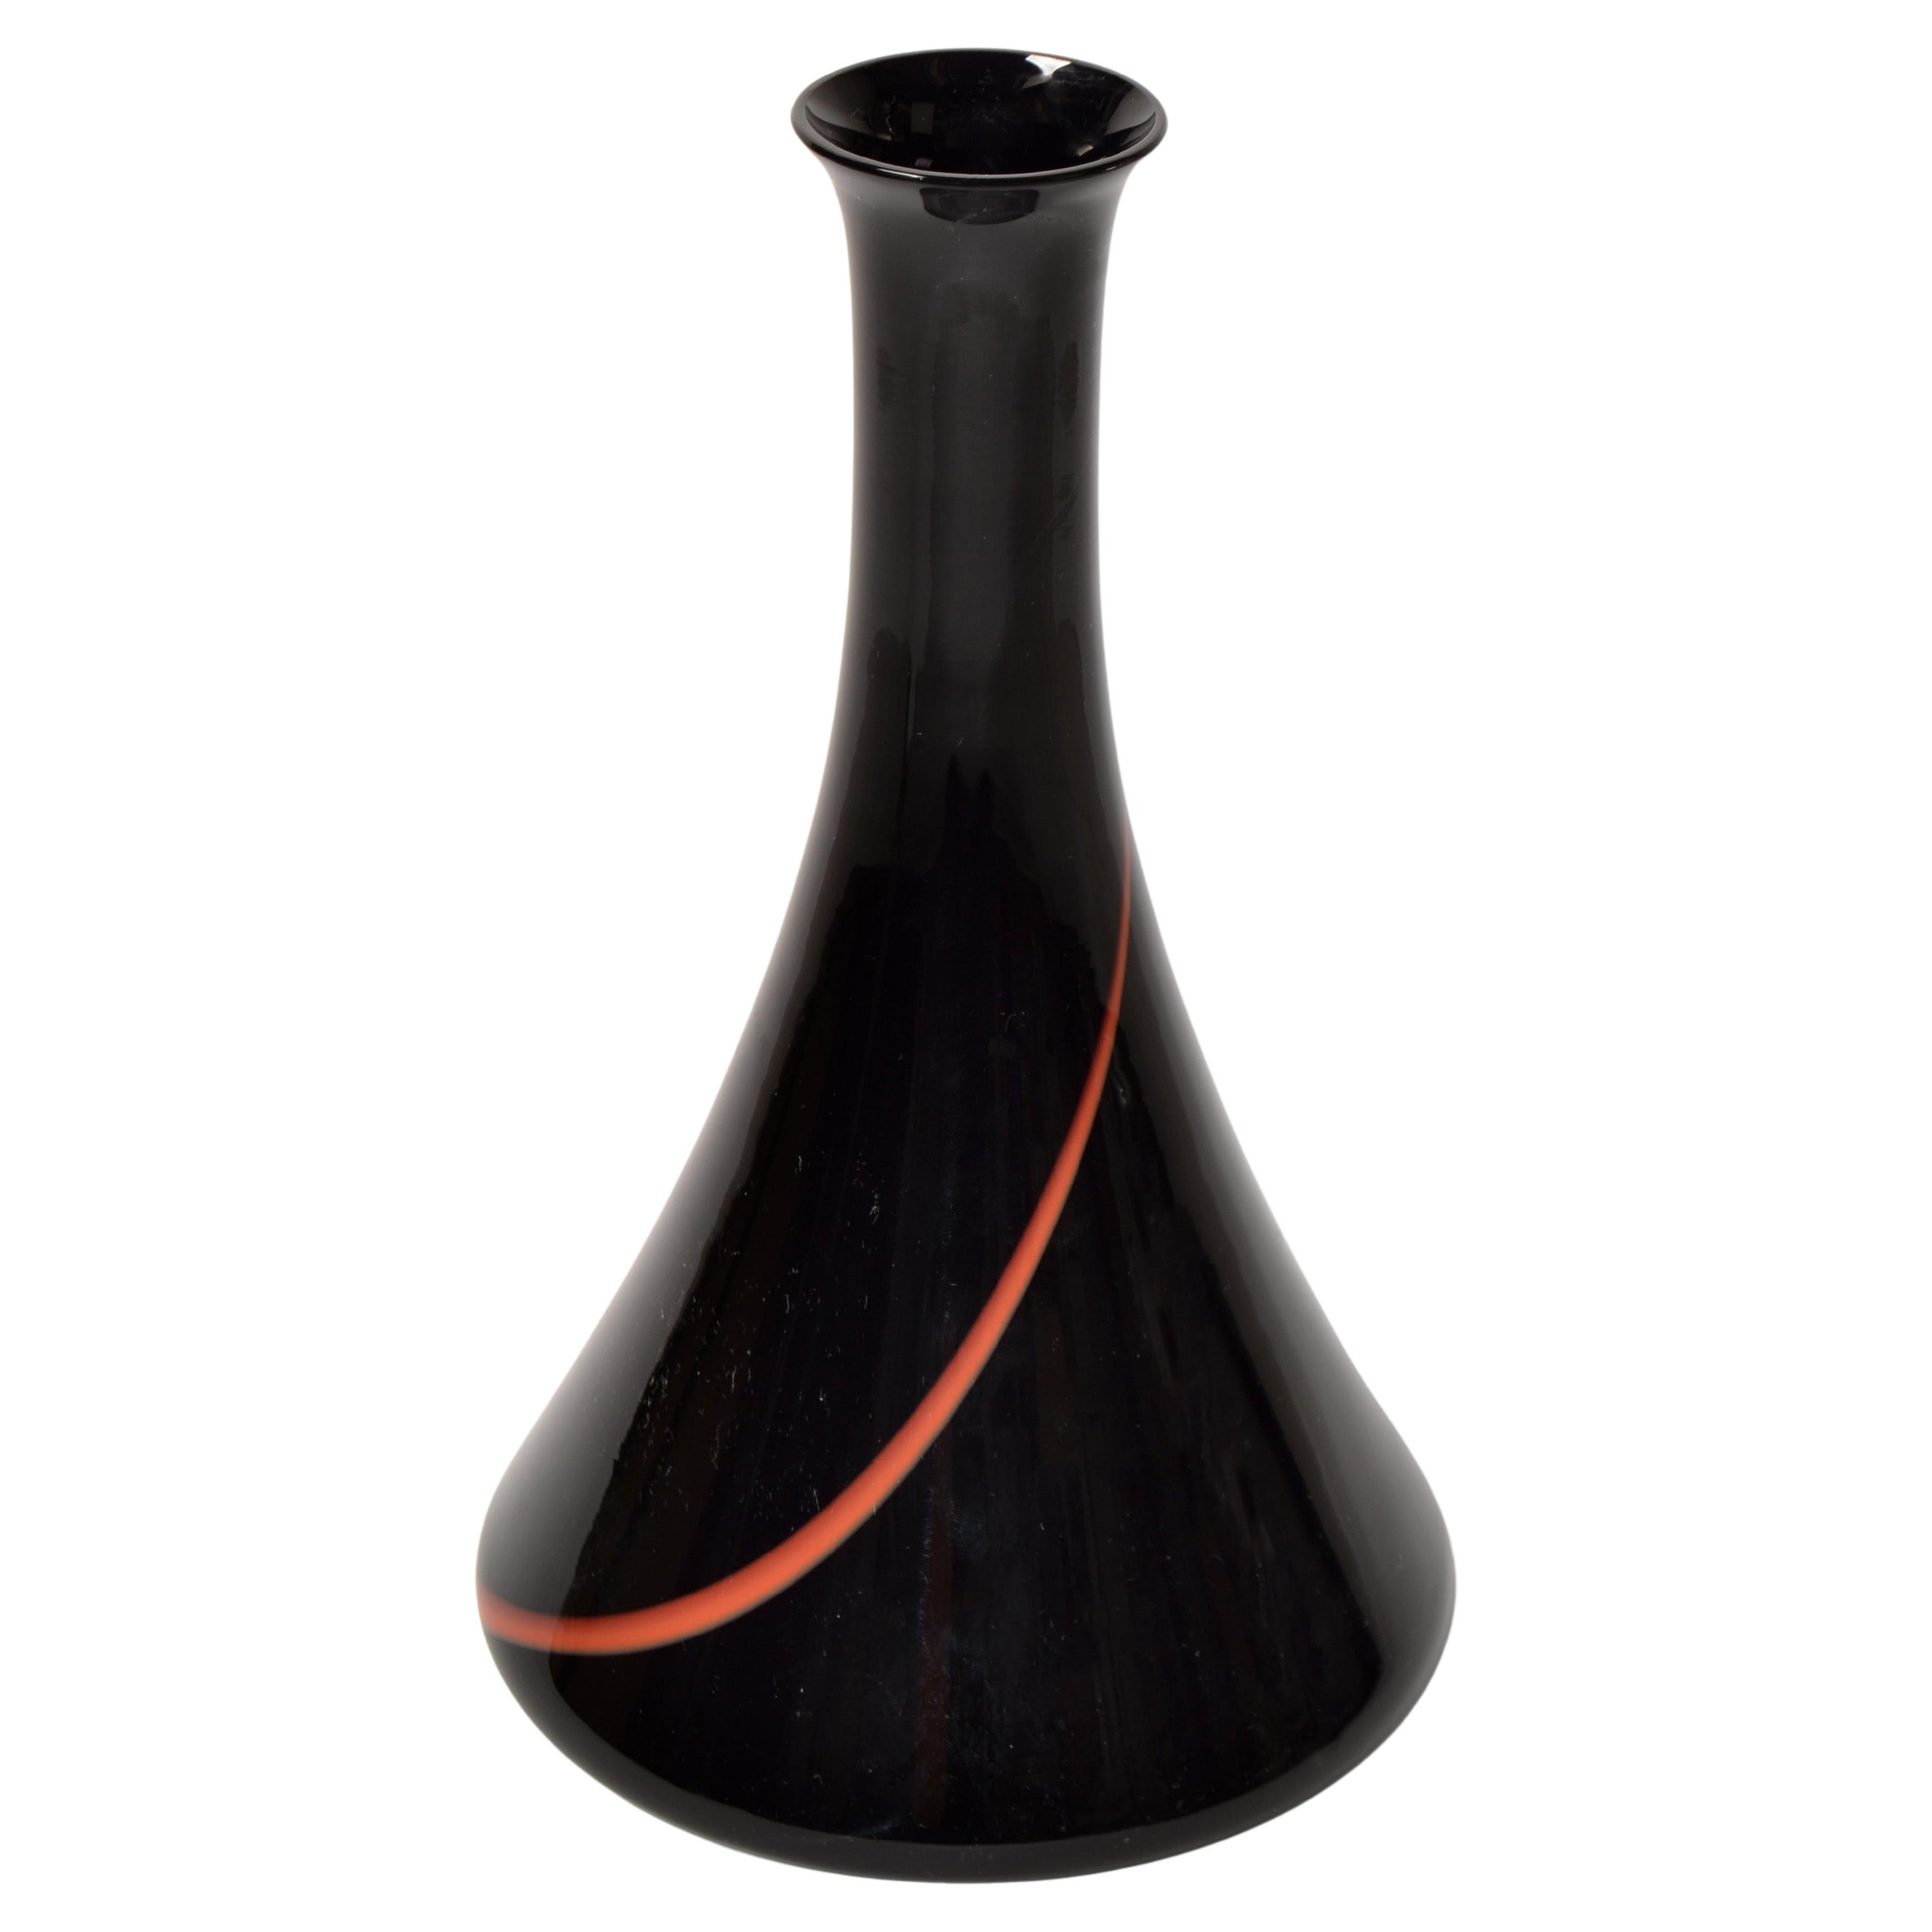 VeArt Italy Murano Art Glass Bud Vases Black Red Swirl Cone Mid-Century Modern  For Sale